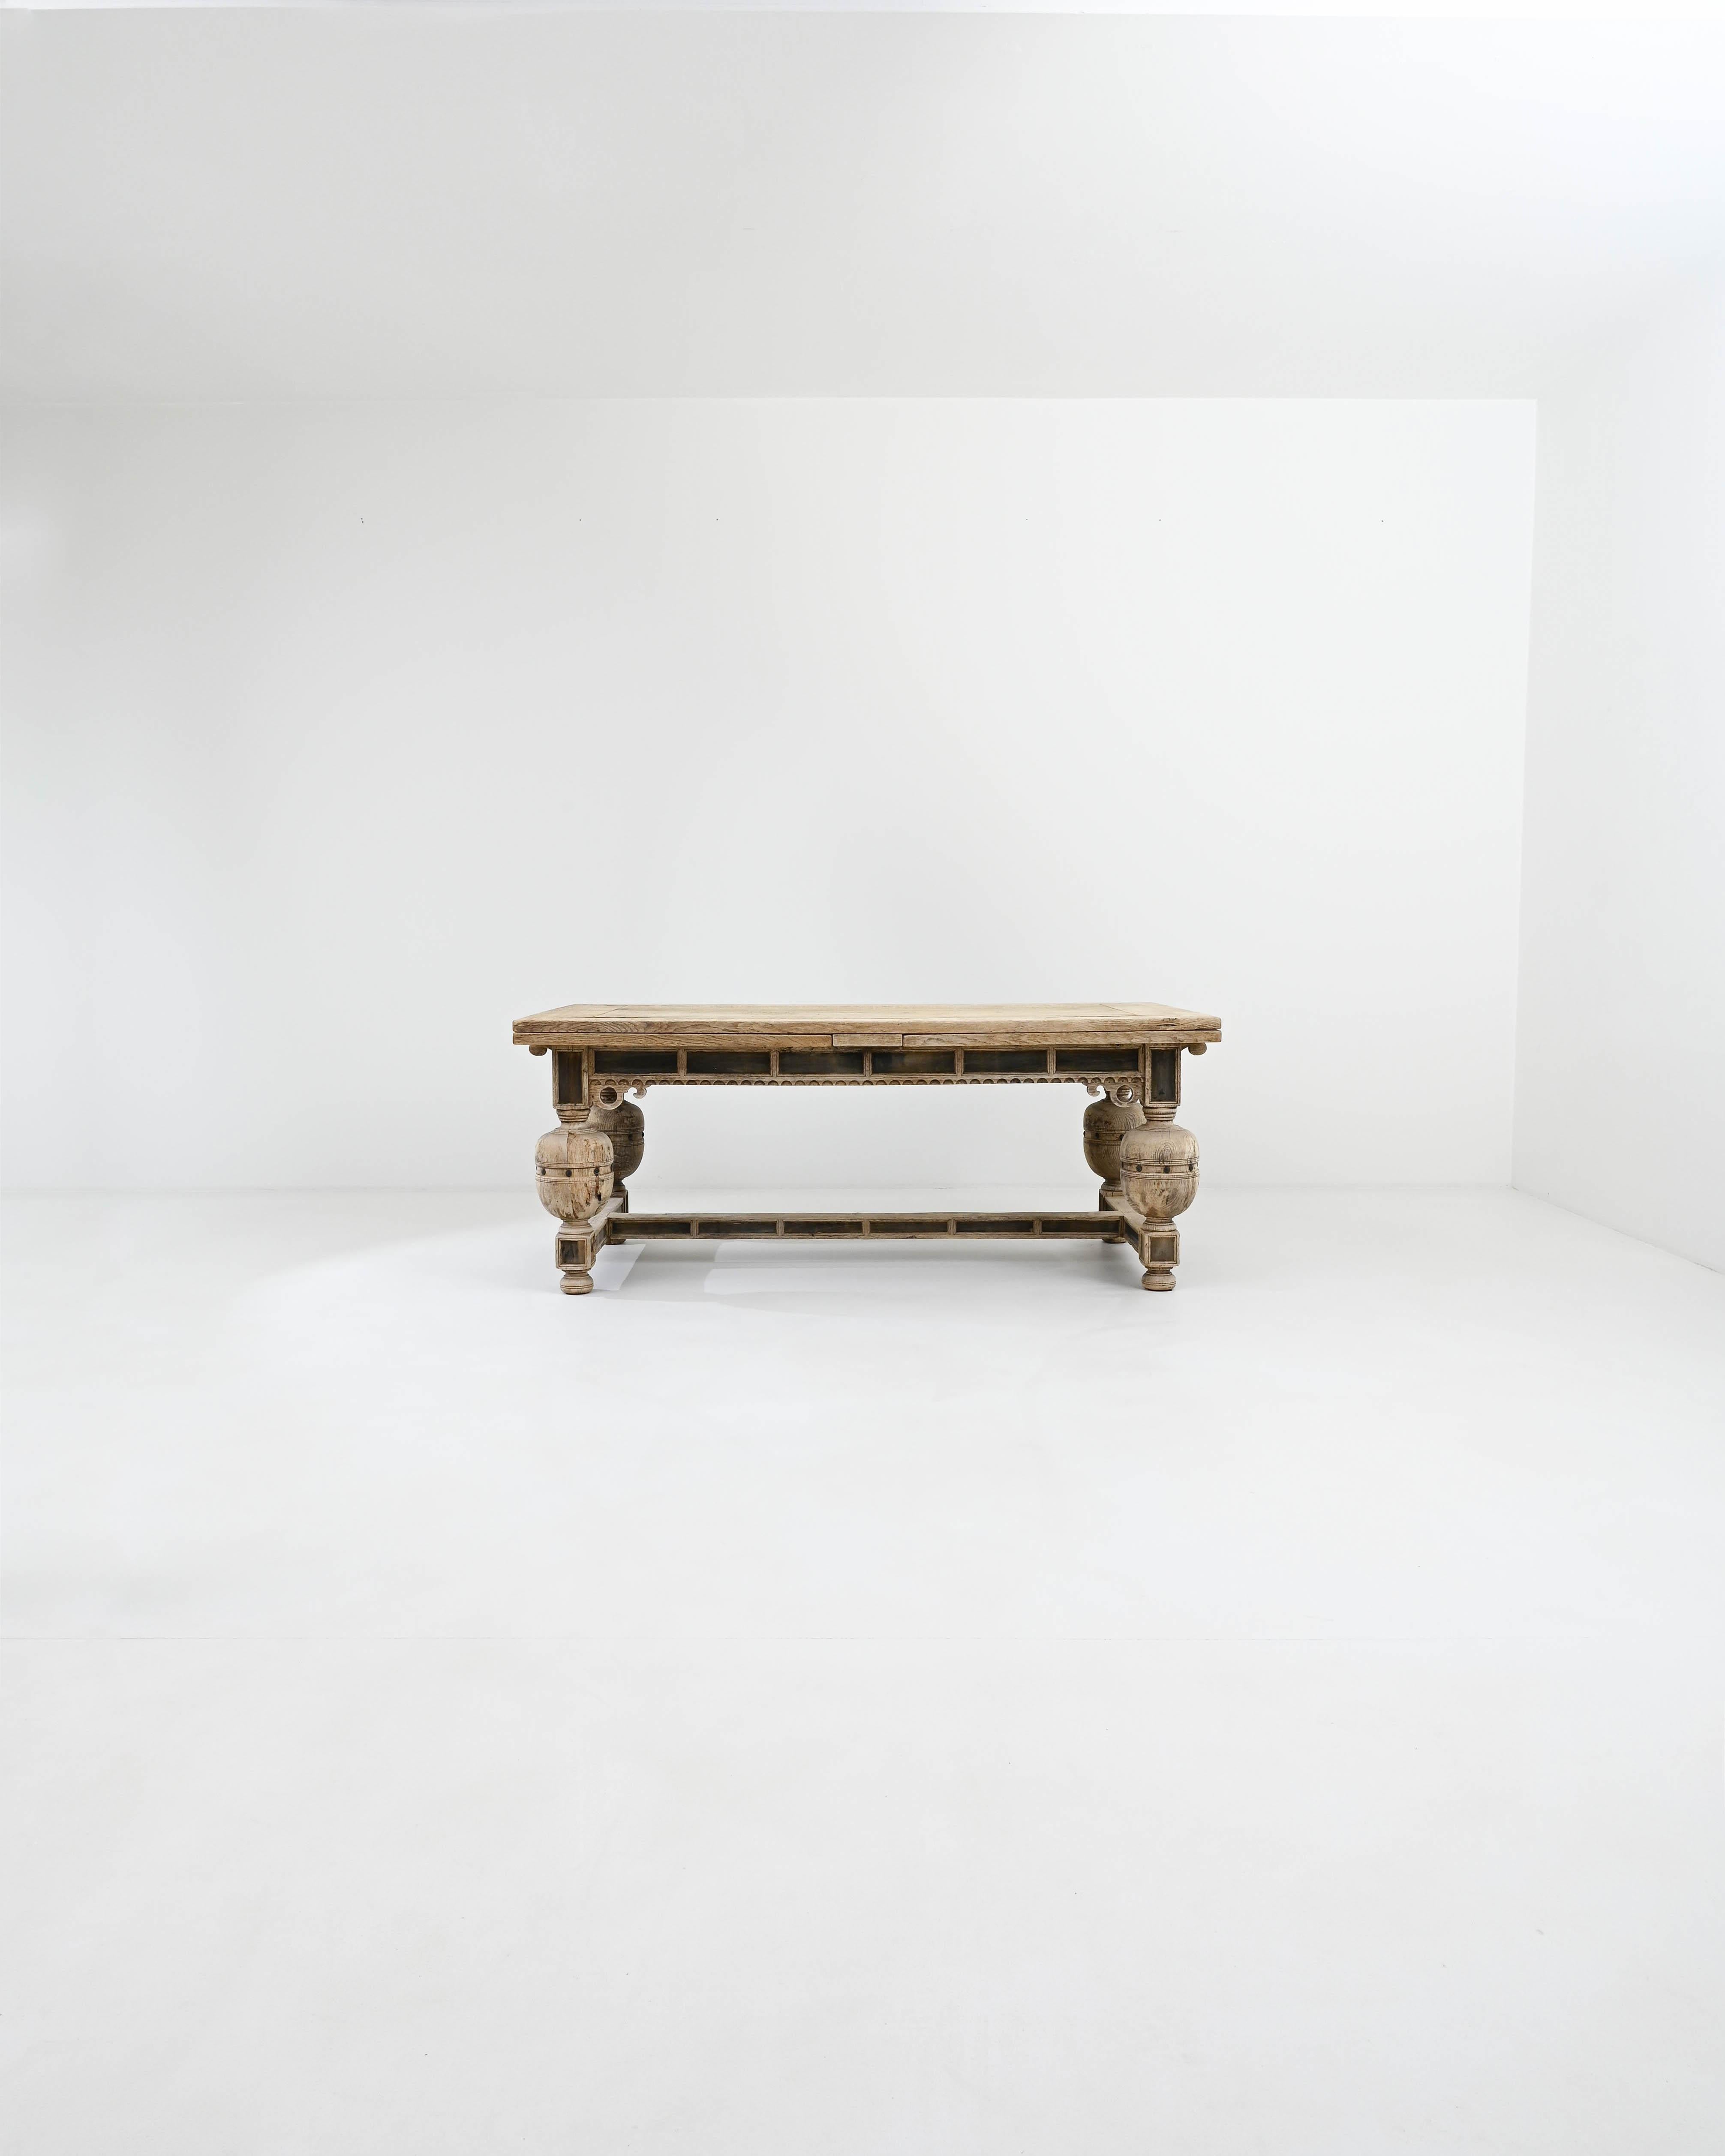 Striking and majestic, this antique oak dining table makes a one-of-a-kind centerpiece. Built in Belgium in the 1800s, the design takes inspiration from the solid, ornate furniture of Renaissance palaces and villas. Decorative brackets and